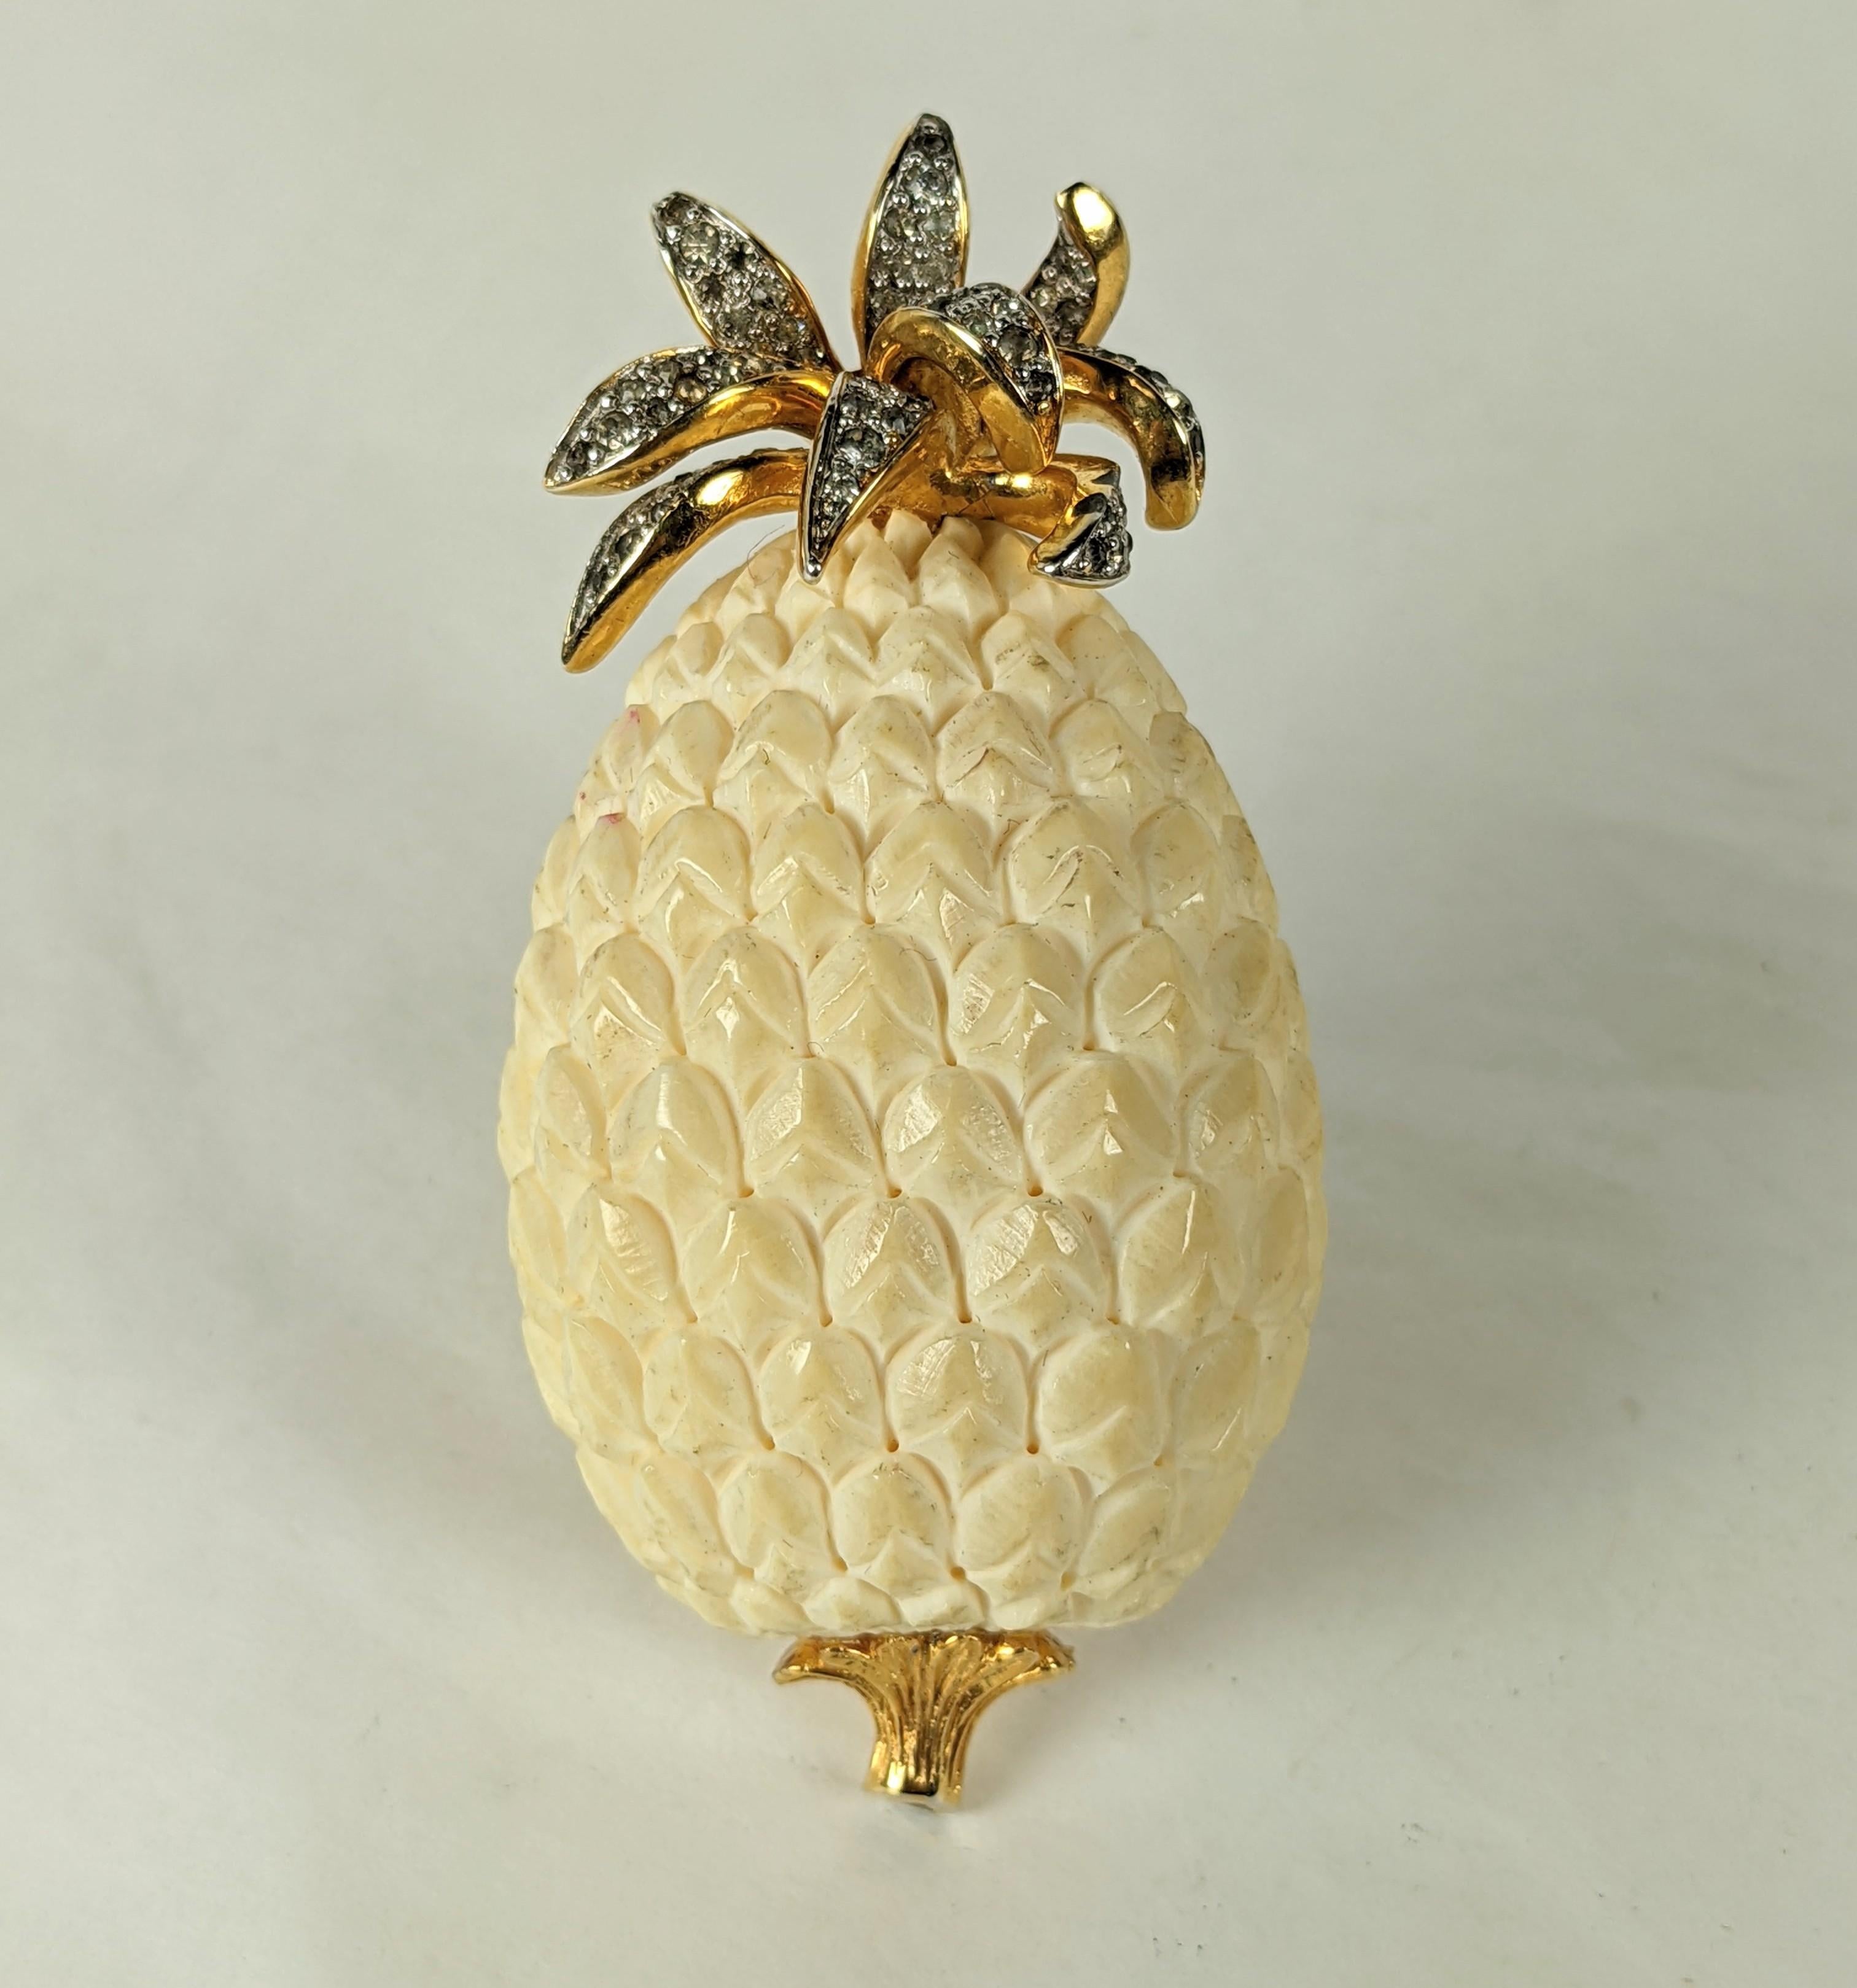 Nettie Rosenstein Carved Bone Pineapple Brooch from the 1960's. Hand carved and set in gilt metal with pave accents.  2.75